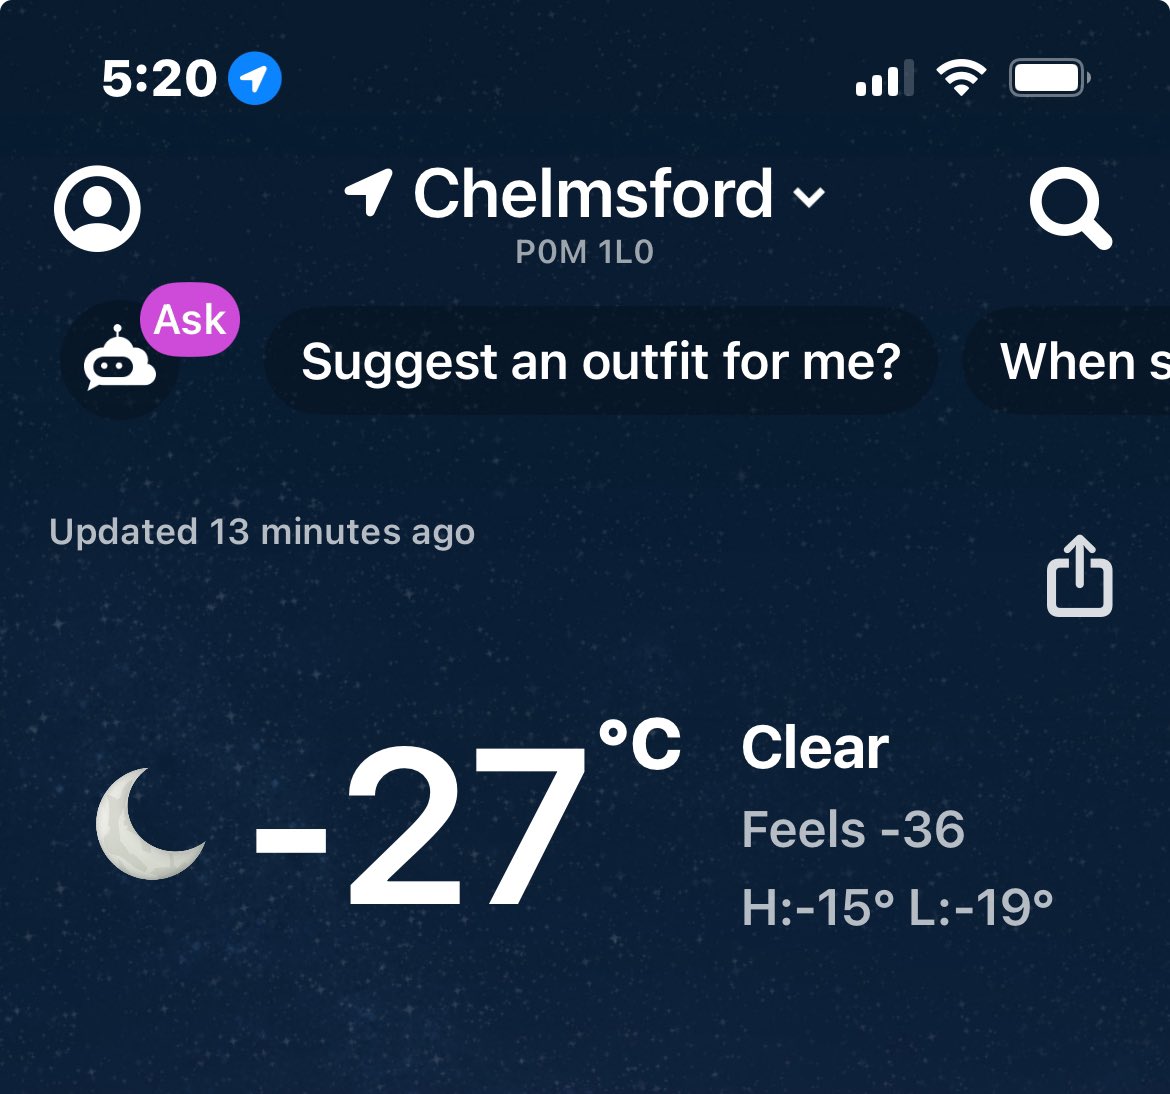 “Suggest an outfit for me”? 

How about I wear a nice, comfy “don’t get out of bed and stay warm under the duvet all day”?! 🥶🥶🥶
#freezingfriday #winter #northernontario